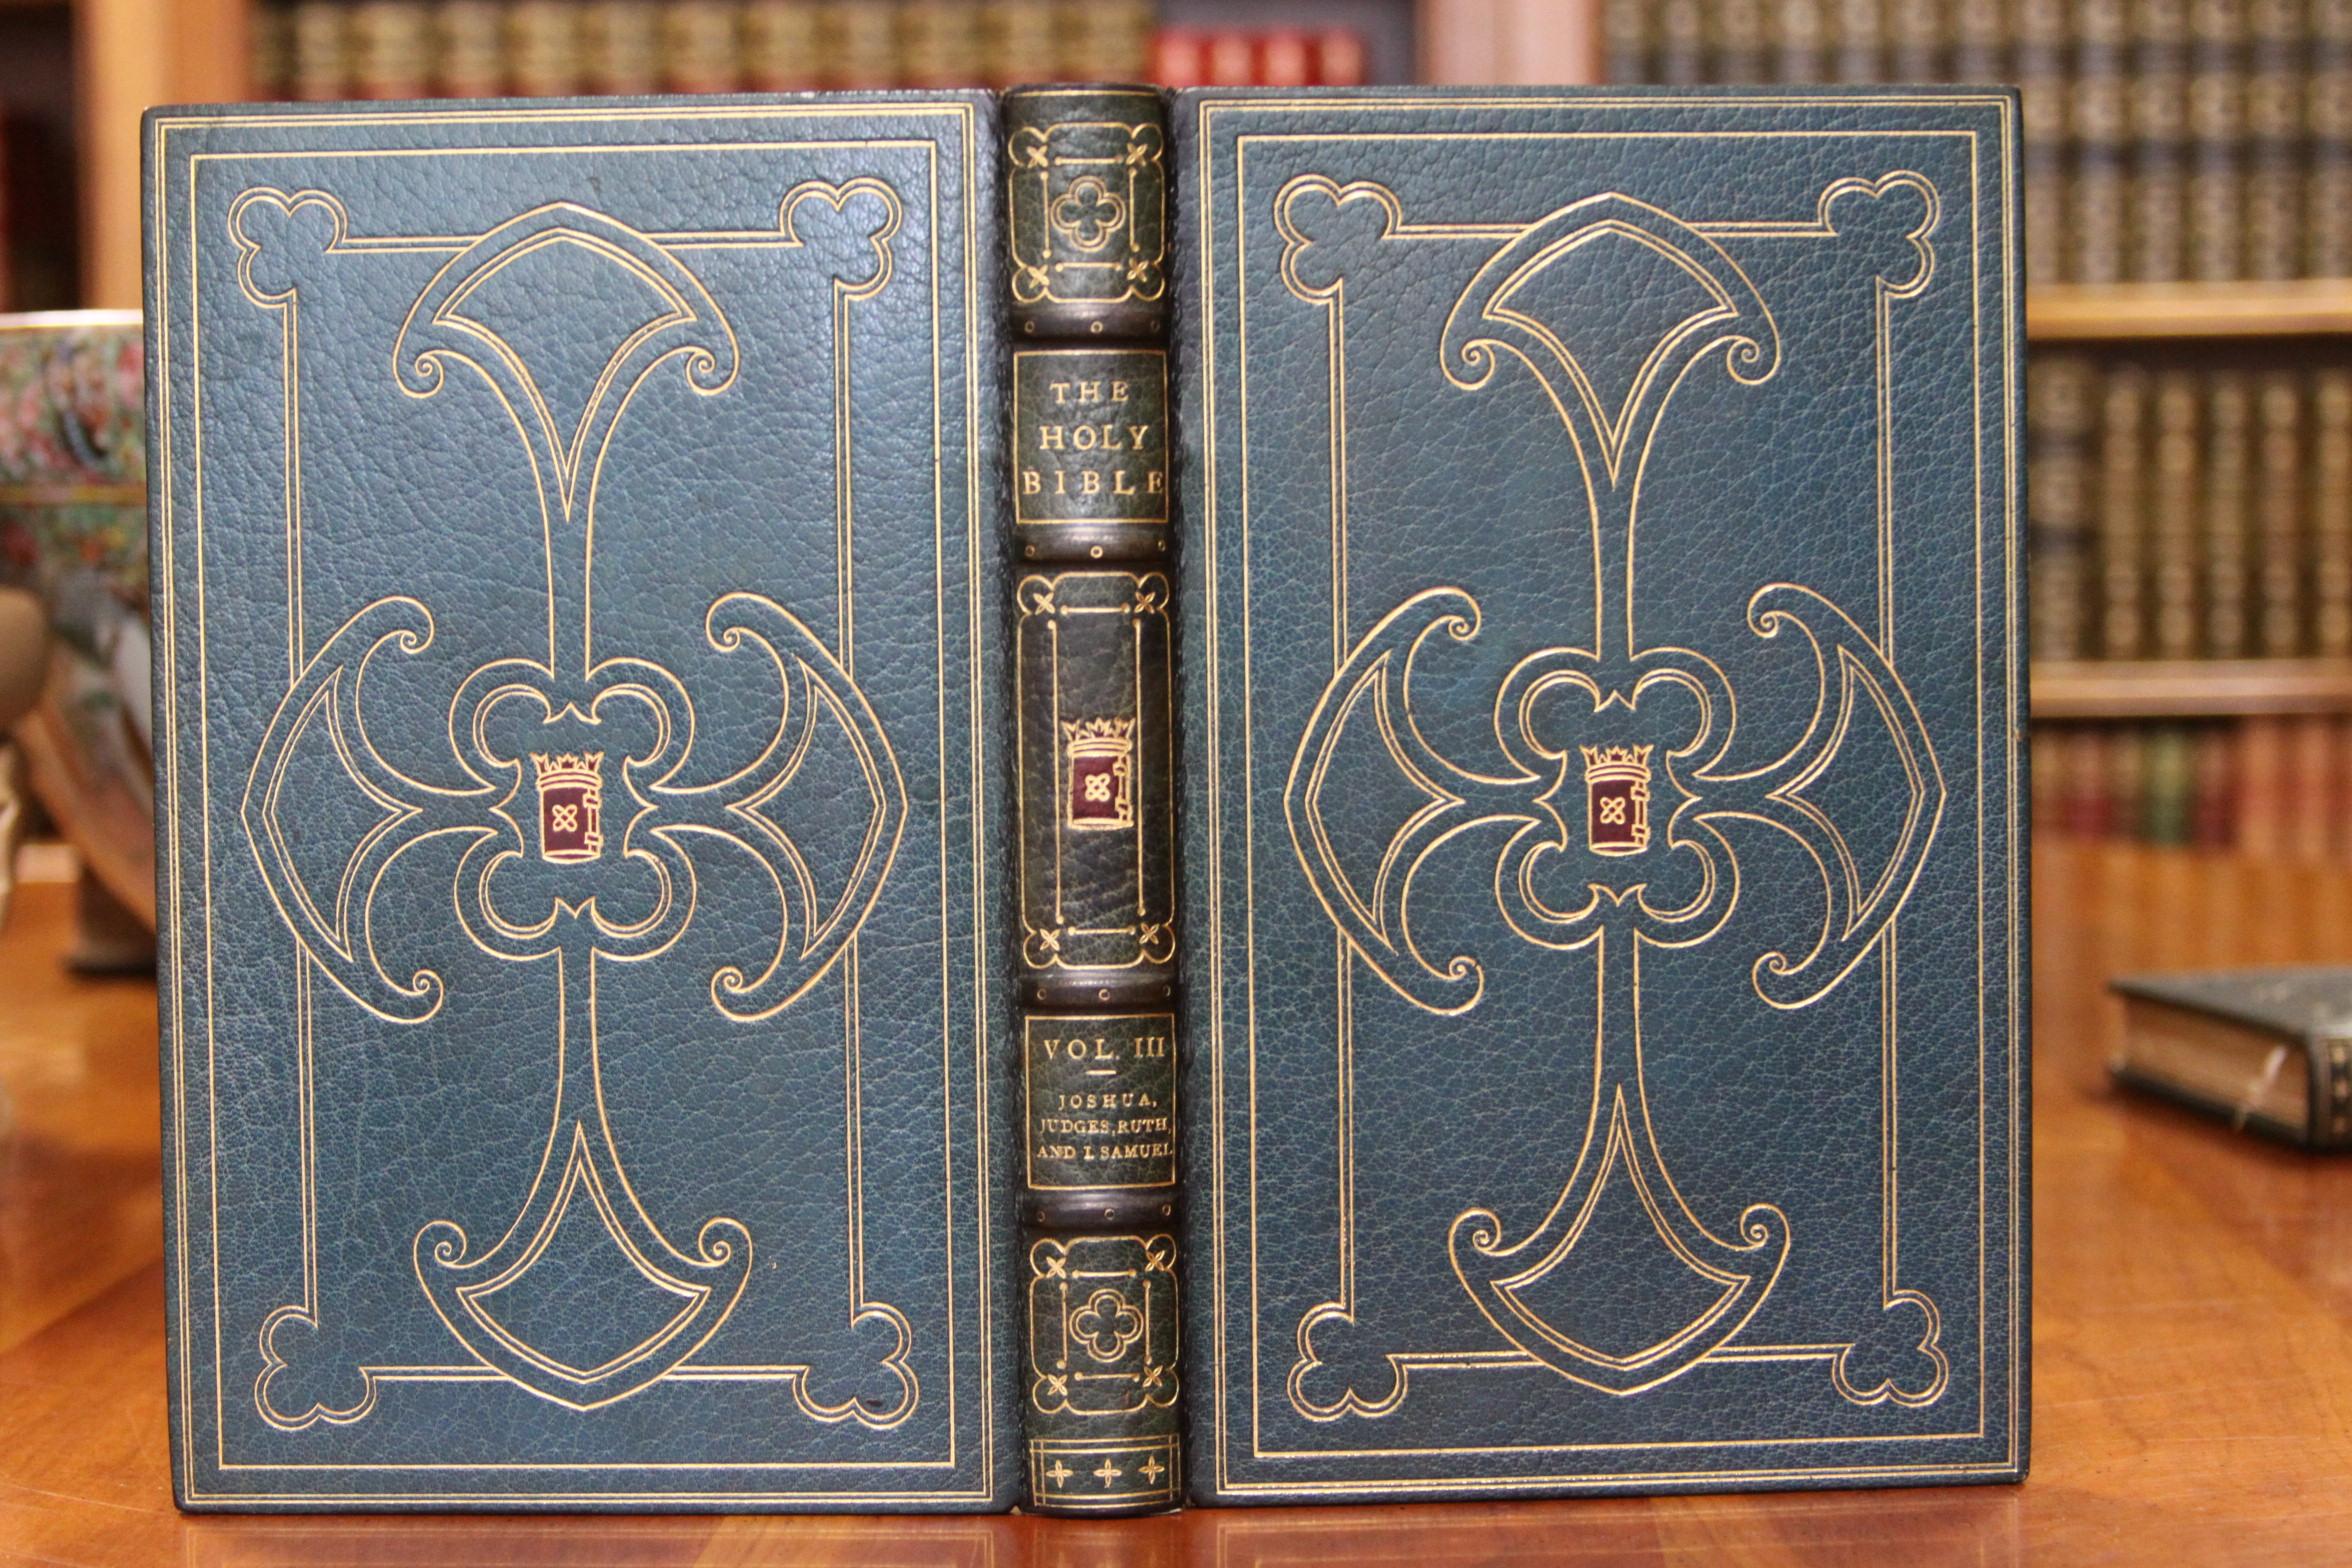 Fourteen volumes. The Holy Bible. Containing the old and new testament and the apocrypha. Printed: R.H. Hinkley Company, Boston, circa 1900s. Illustrated through-out set with title tissue guard.
Bound in full aqua green morocco, gilt Gothic theme